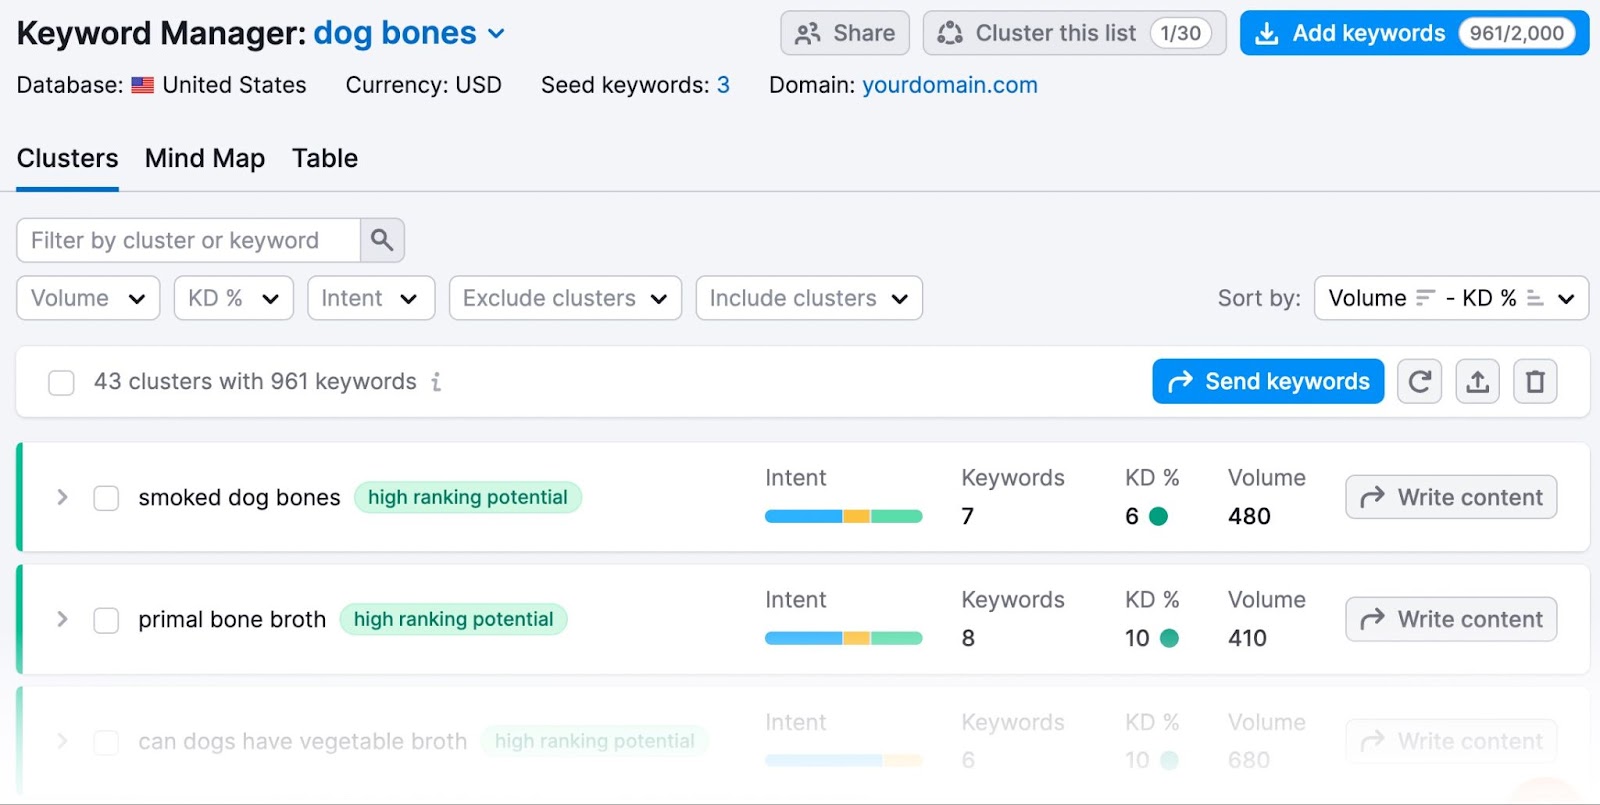 A keywords list generated for "dog bones" in Keyword Manager tool